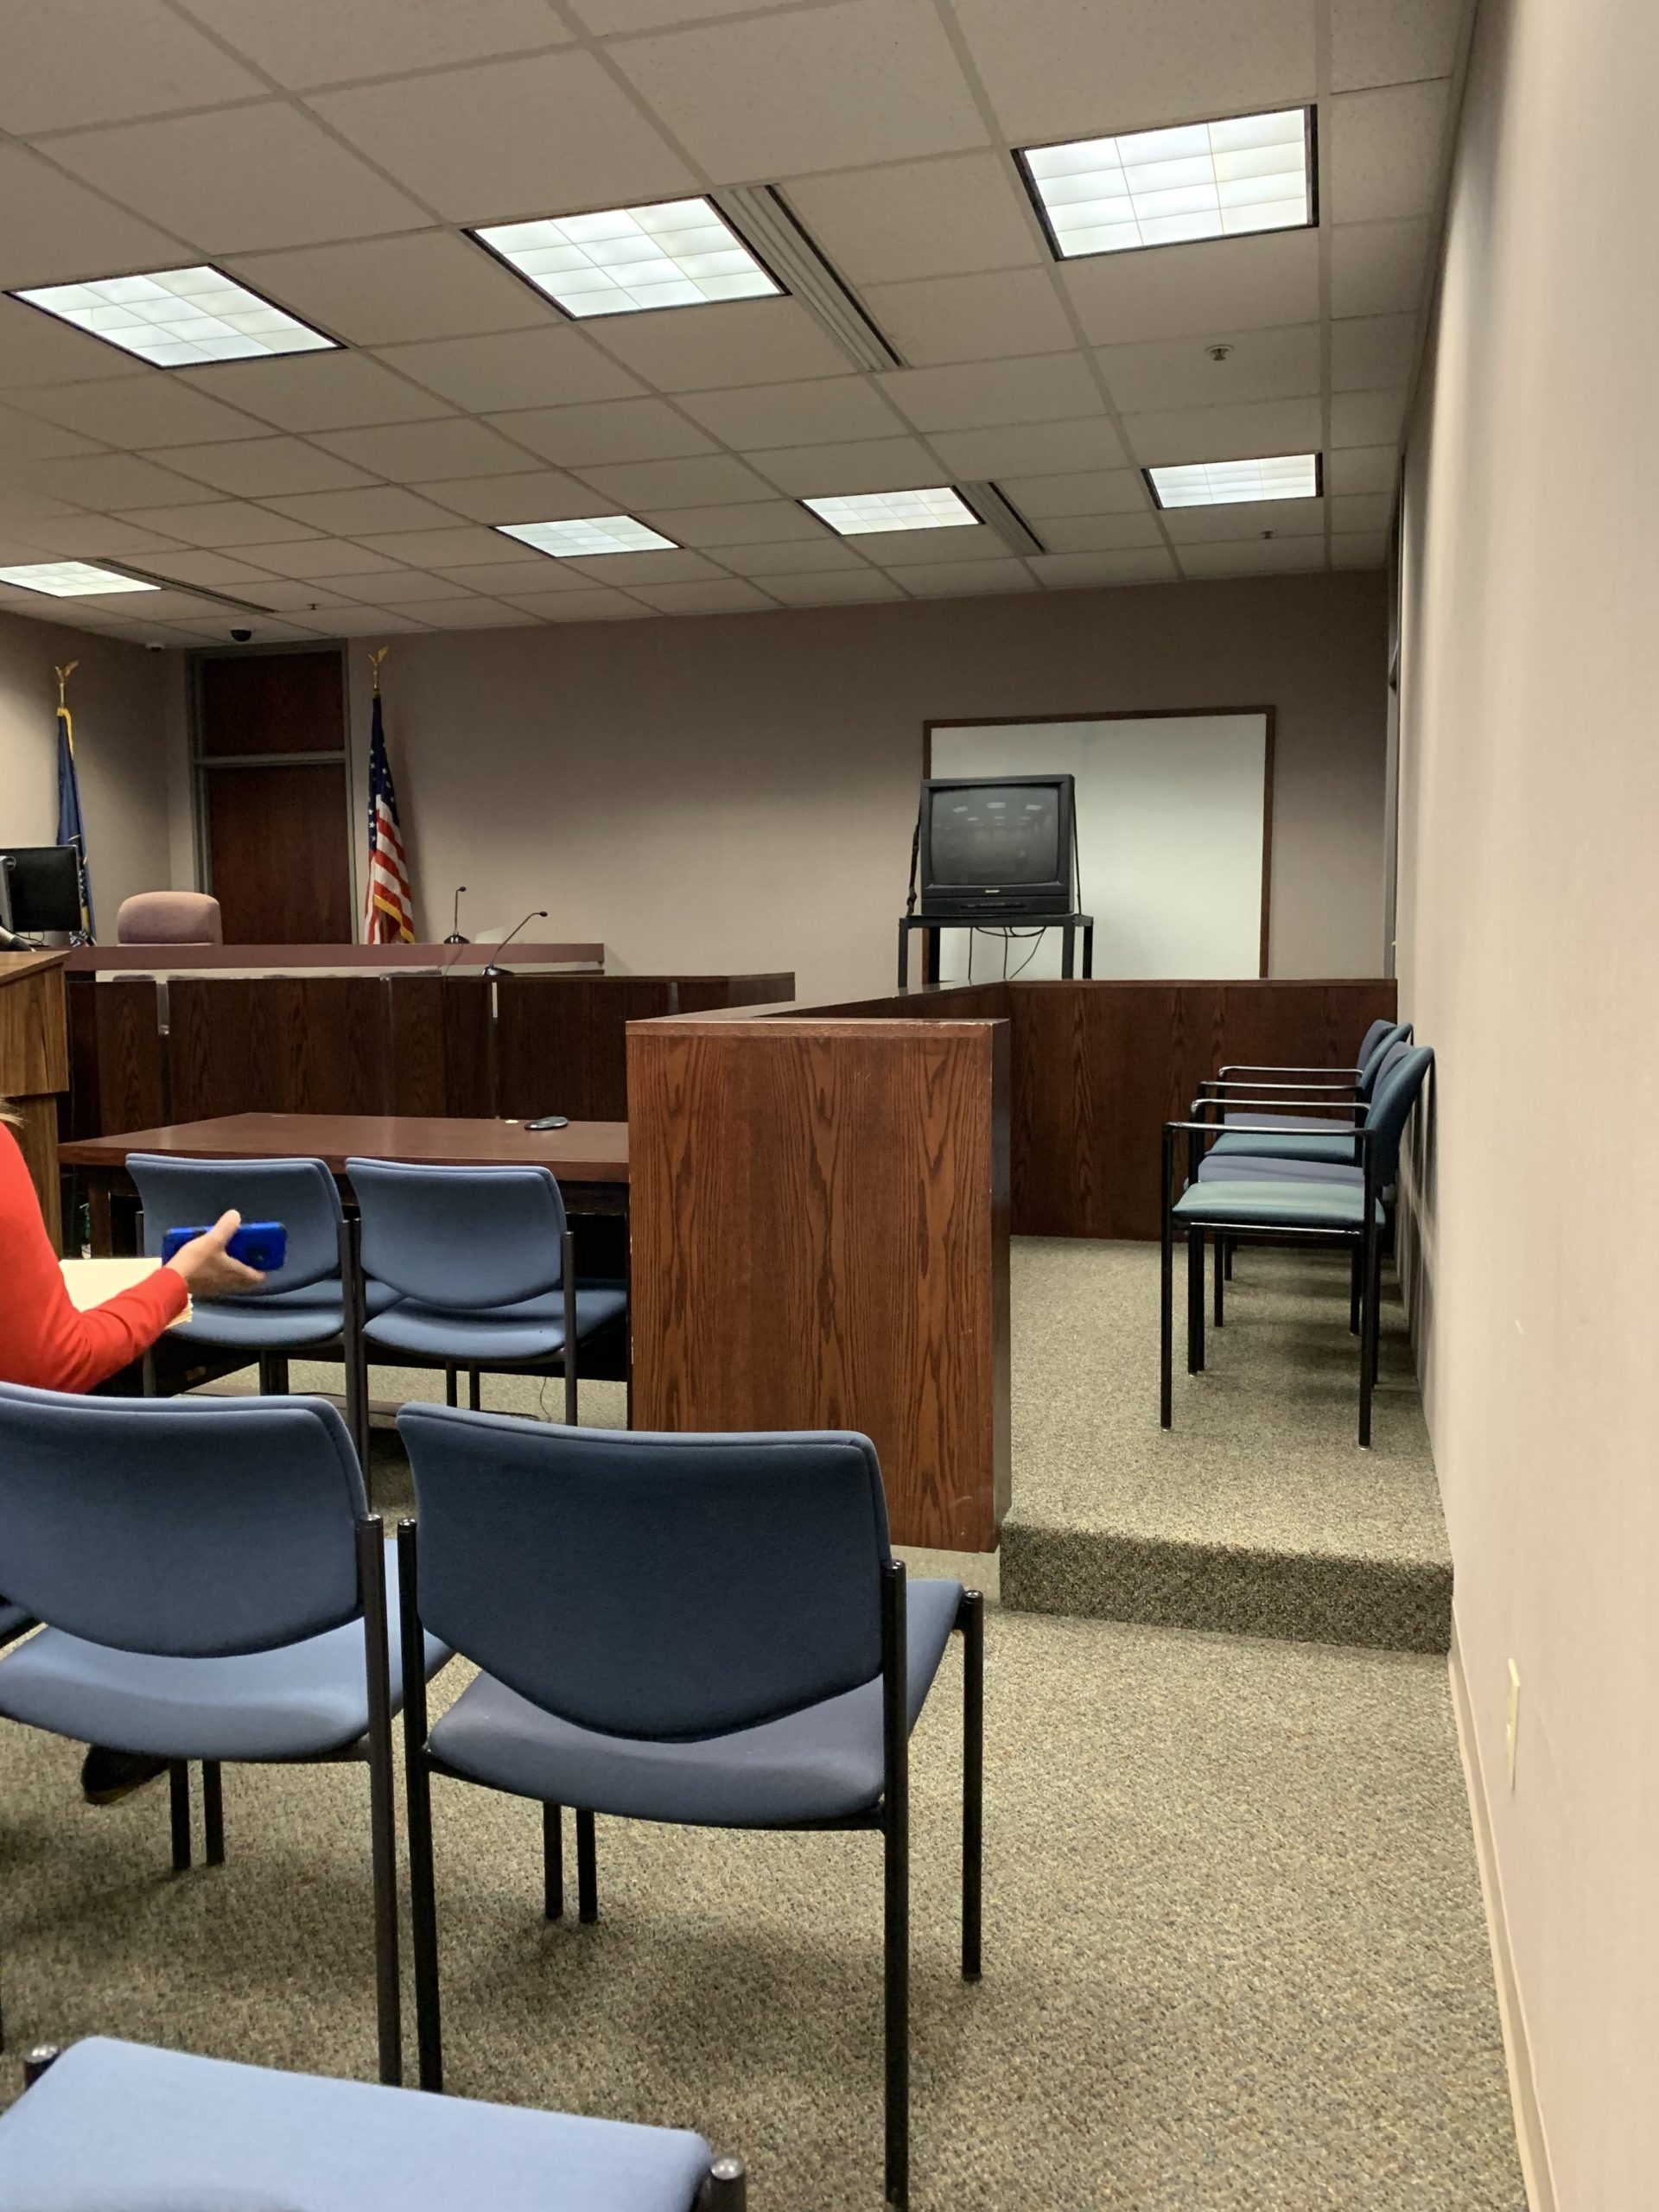 Small claims courtroom